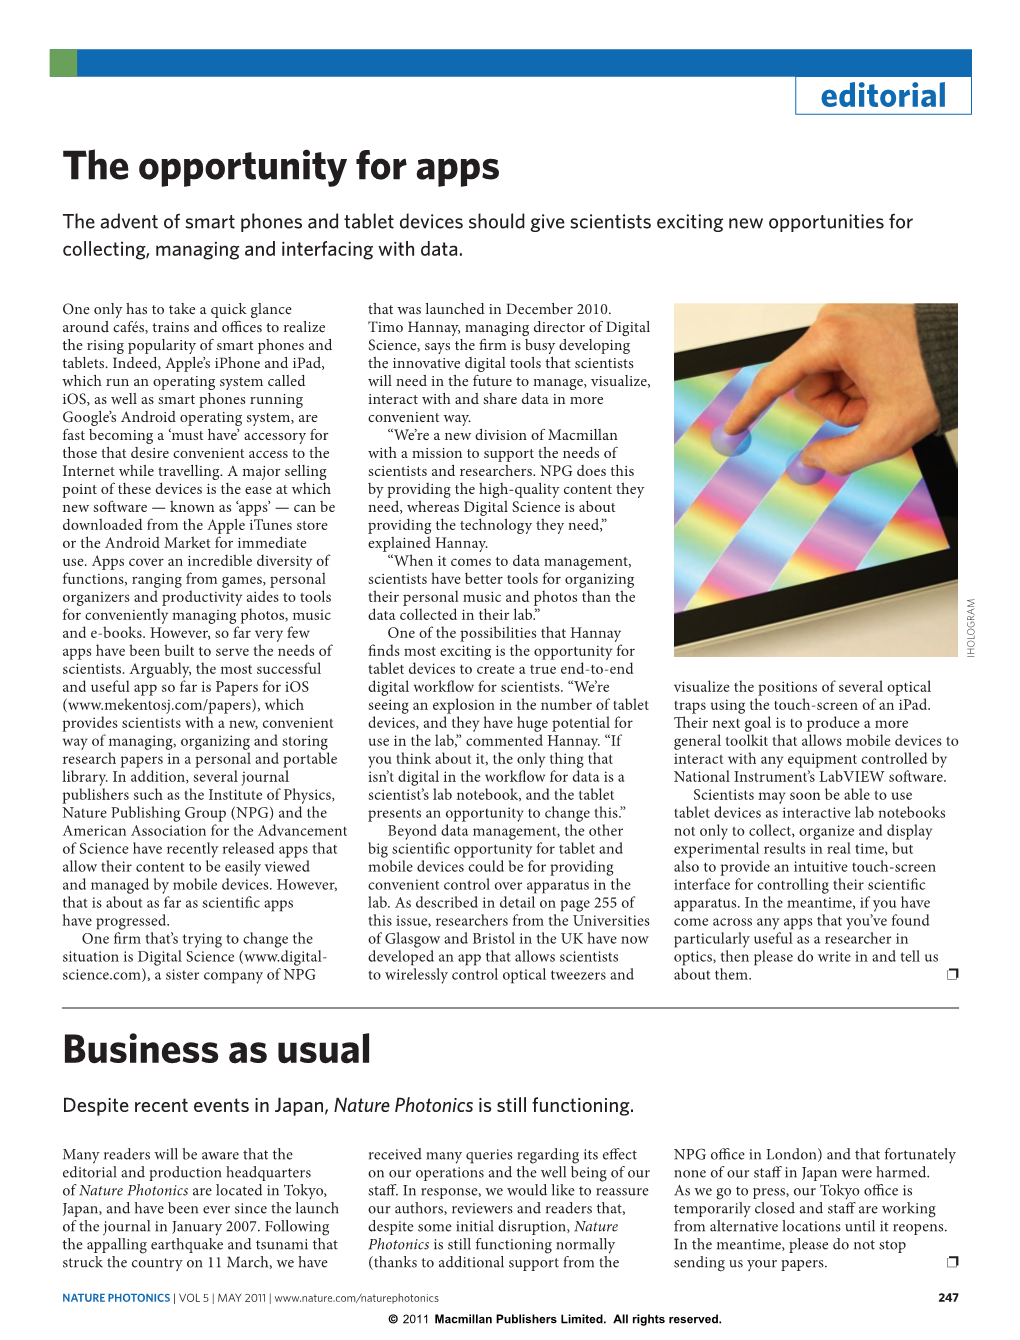 The Opportunity for Apps